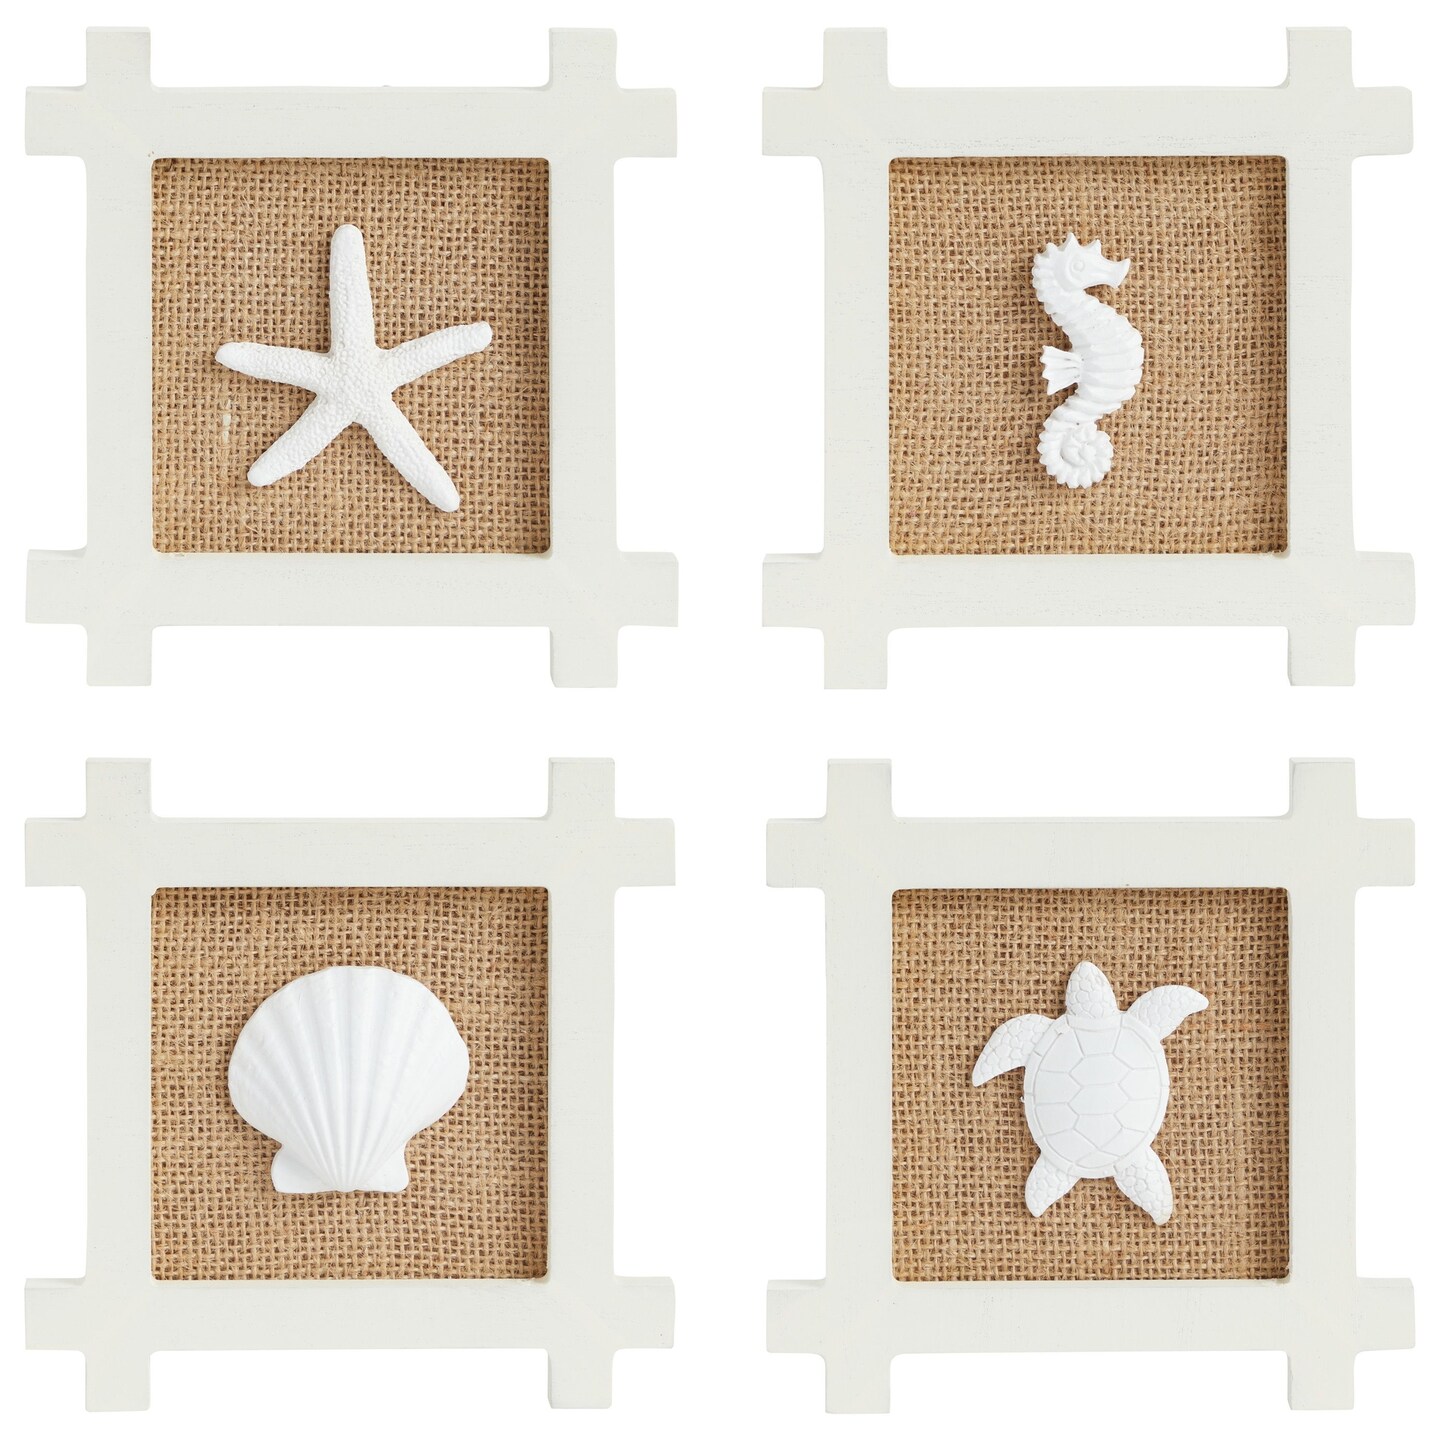 Set of 4 Coastal Decor for Home, Hanging Seashell Wall Decorations for Beach Theme Bathroom (5.9 x 5.9 in)